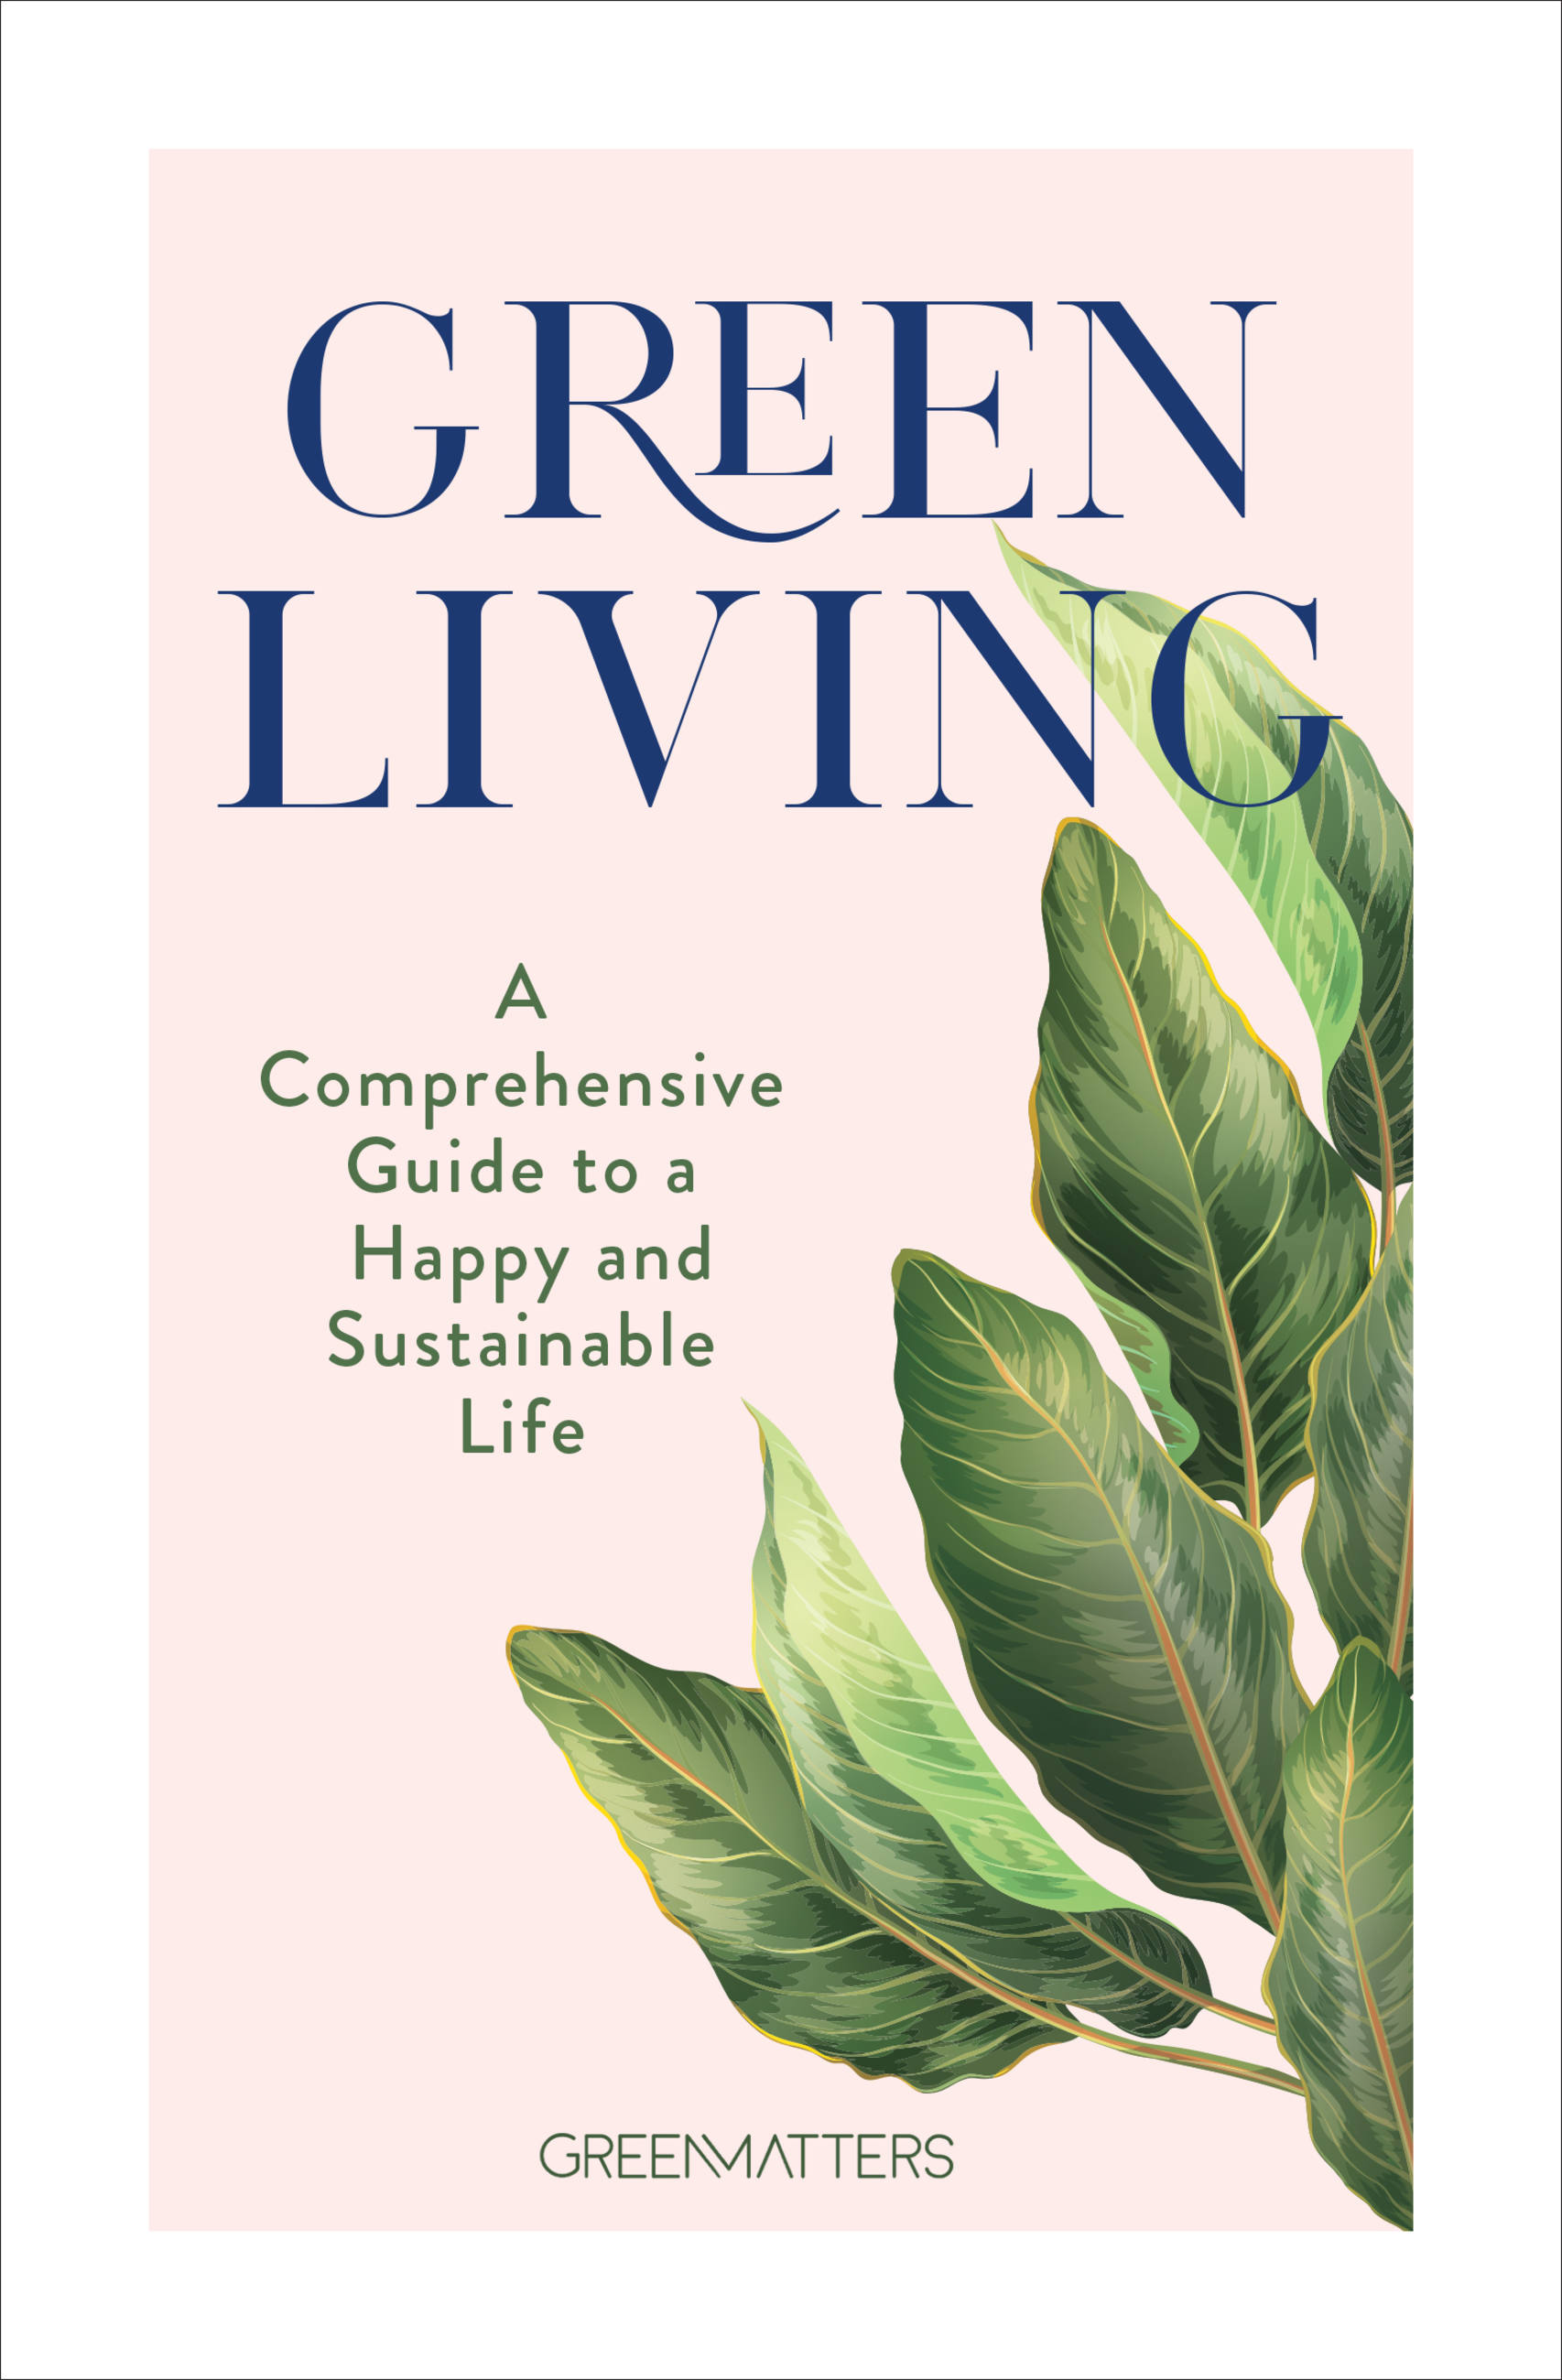 GREEN LIVING : A COMPREHENSIVE GUIDE TO A HAPPY AND SUSTAINABLE LIFE, by GREEN MATTERS